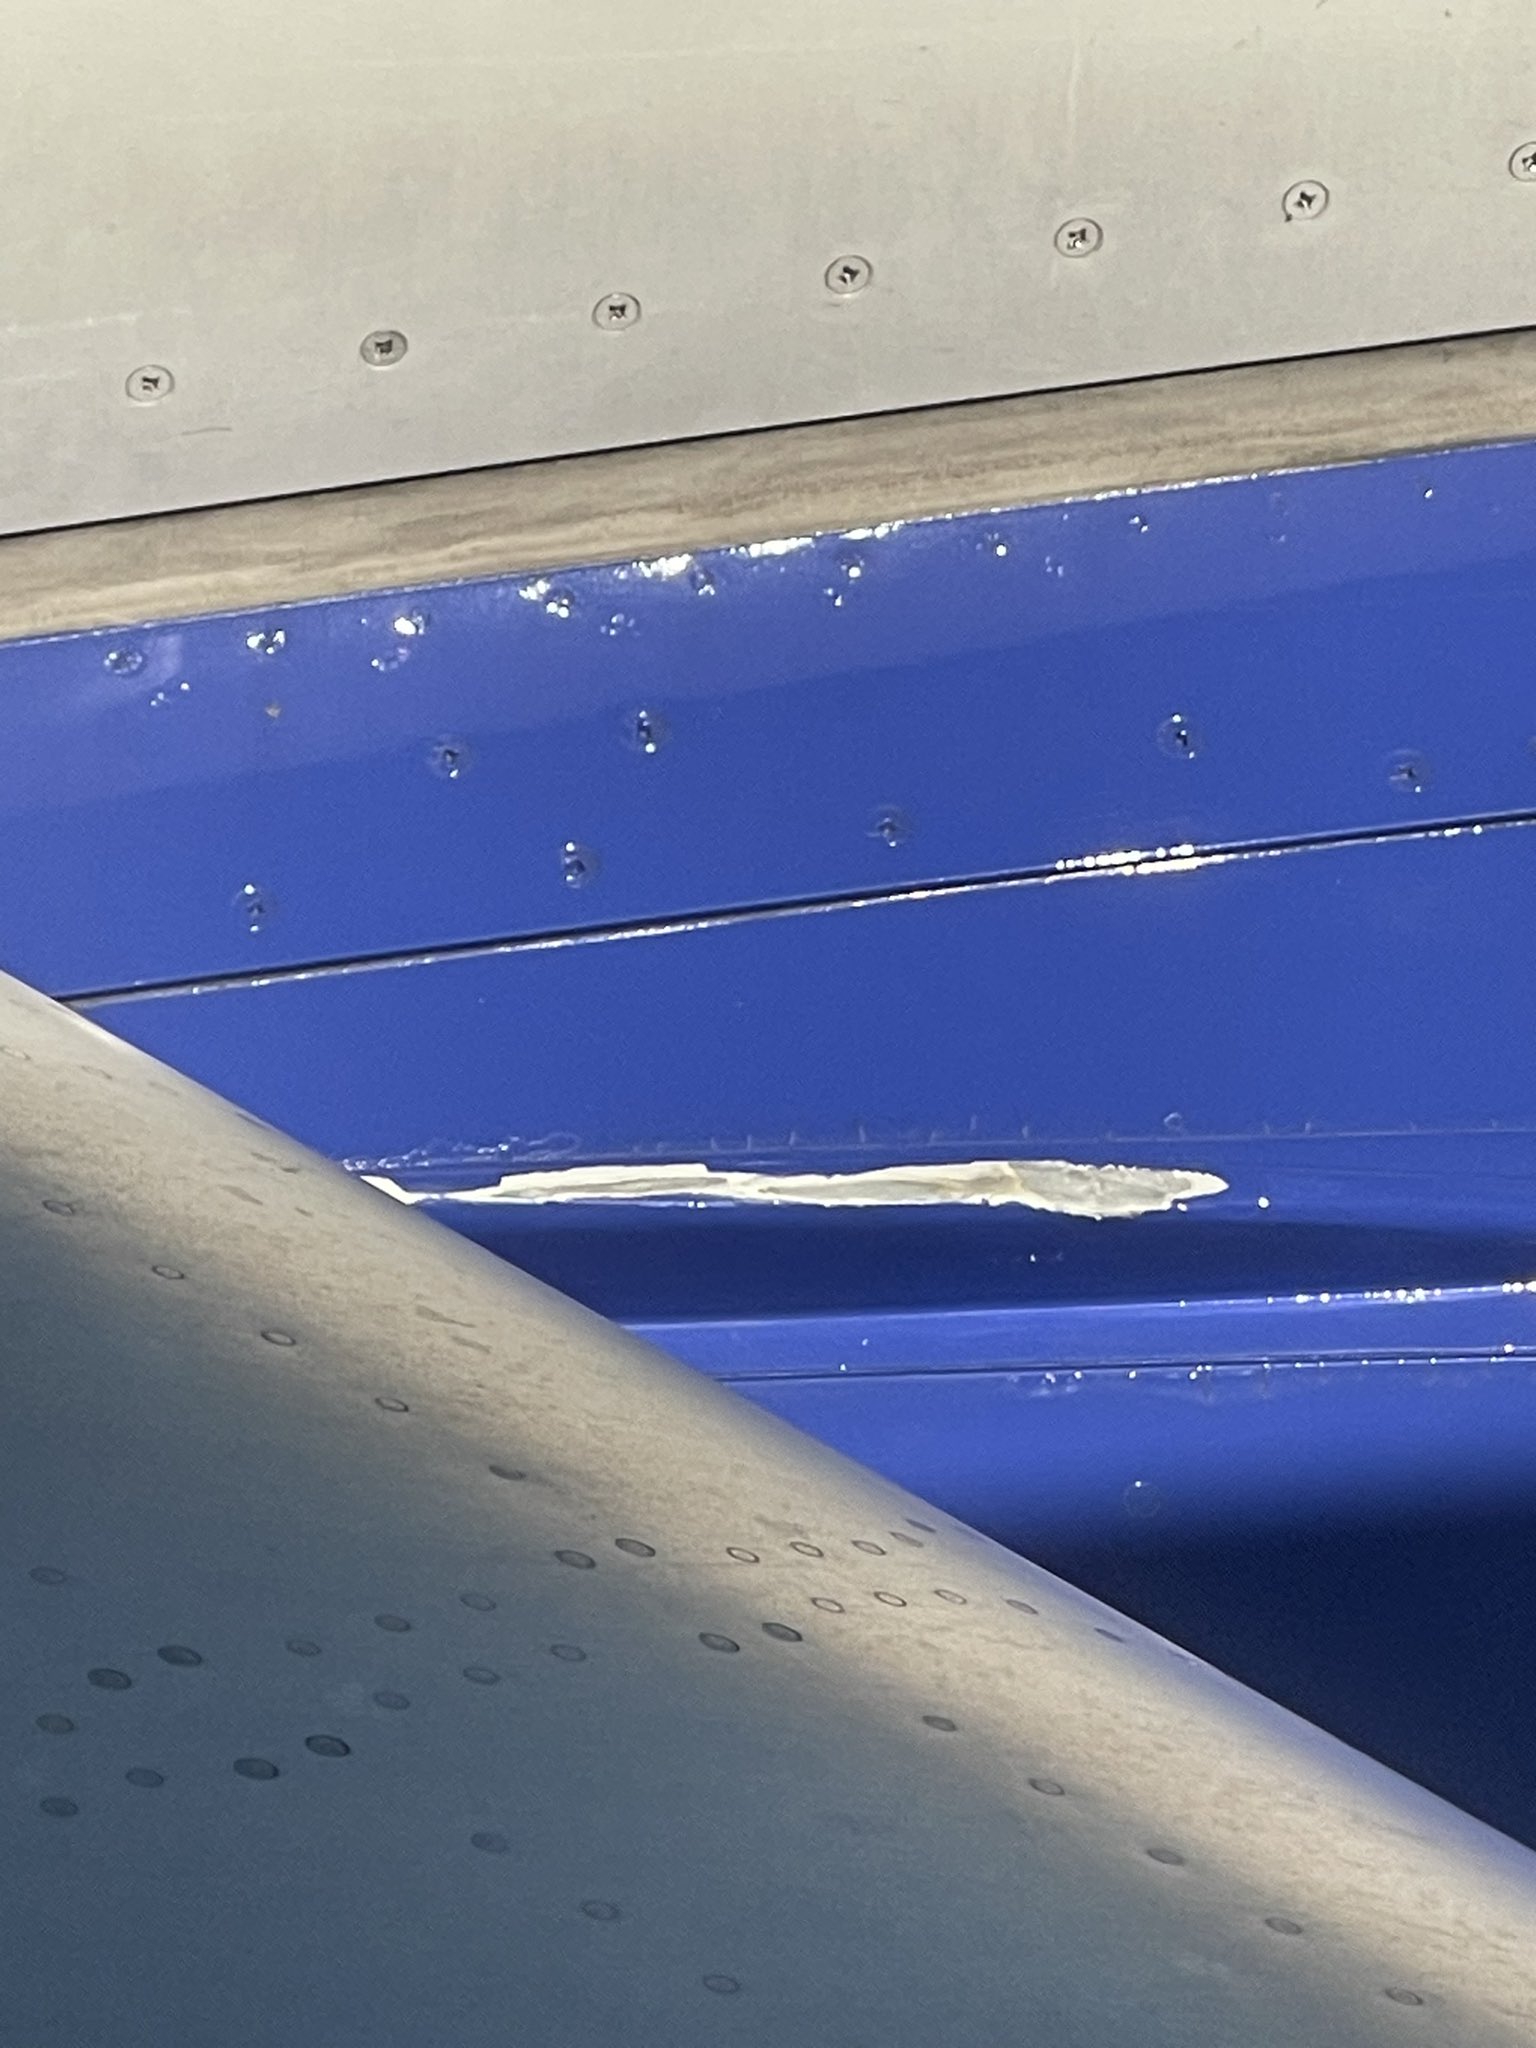 Alarming Incident: Southwest Airlines Flight #WN3695 Loses Cowlings Mid-Air